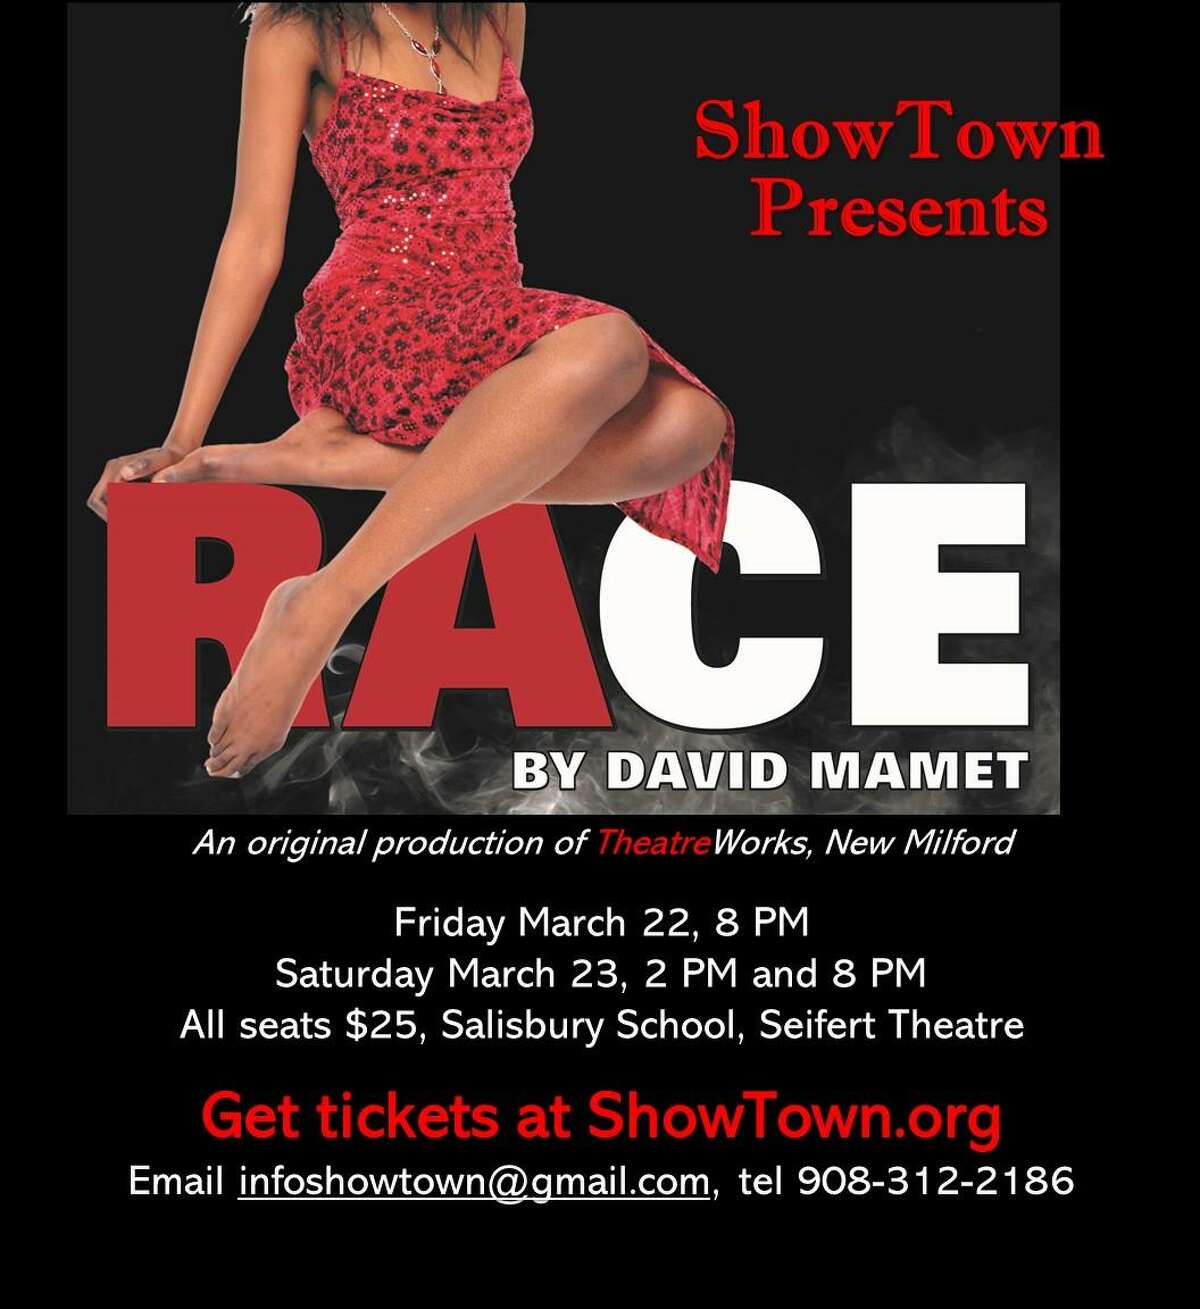 ShowTown, a new theater group in Lakeville, is staging "Race" in Salisbury March 22-23.